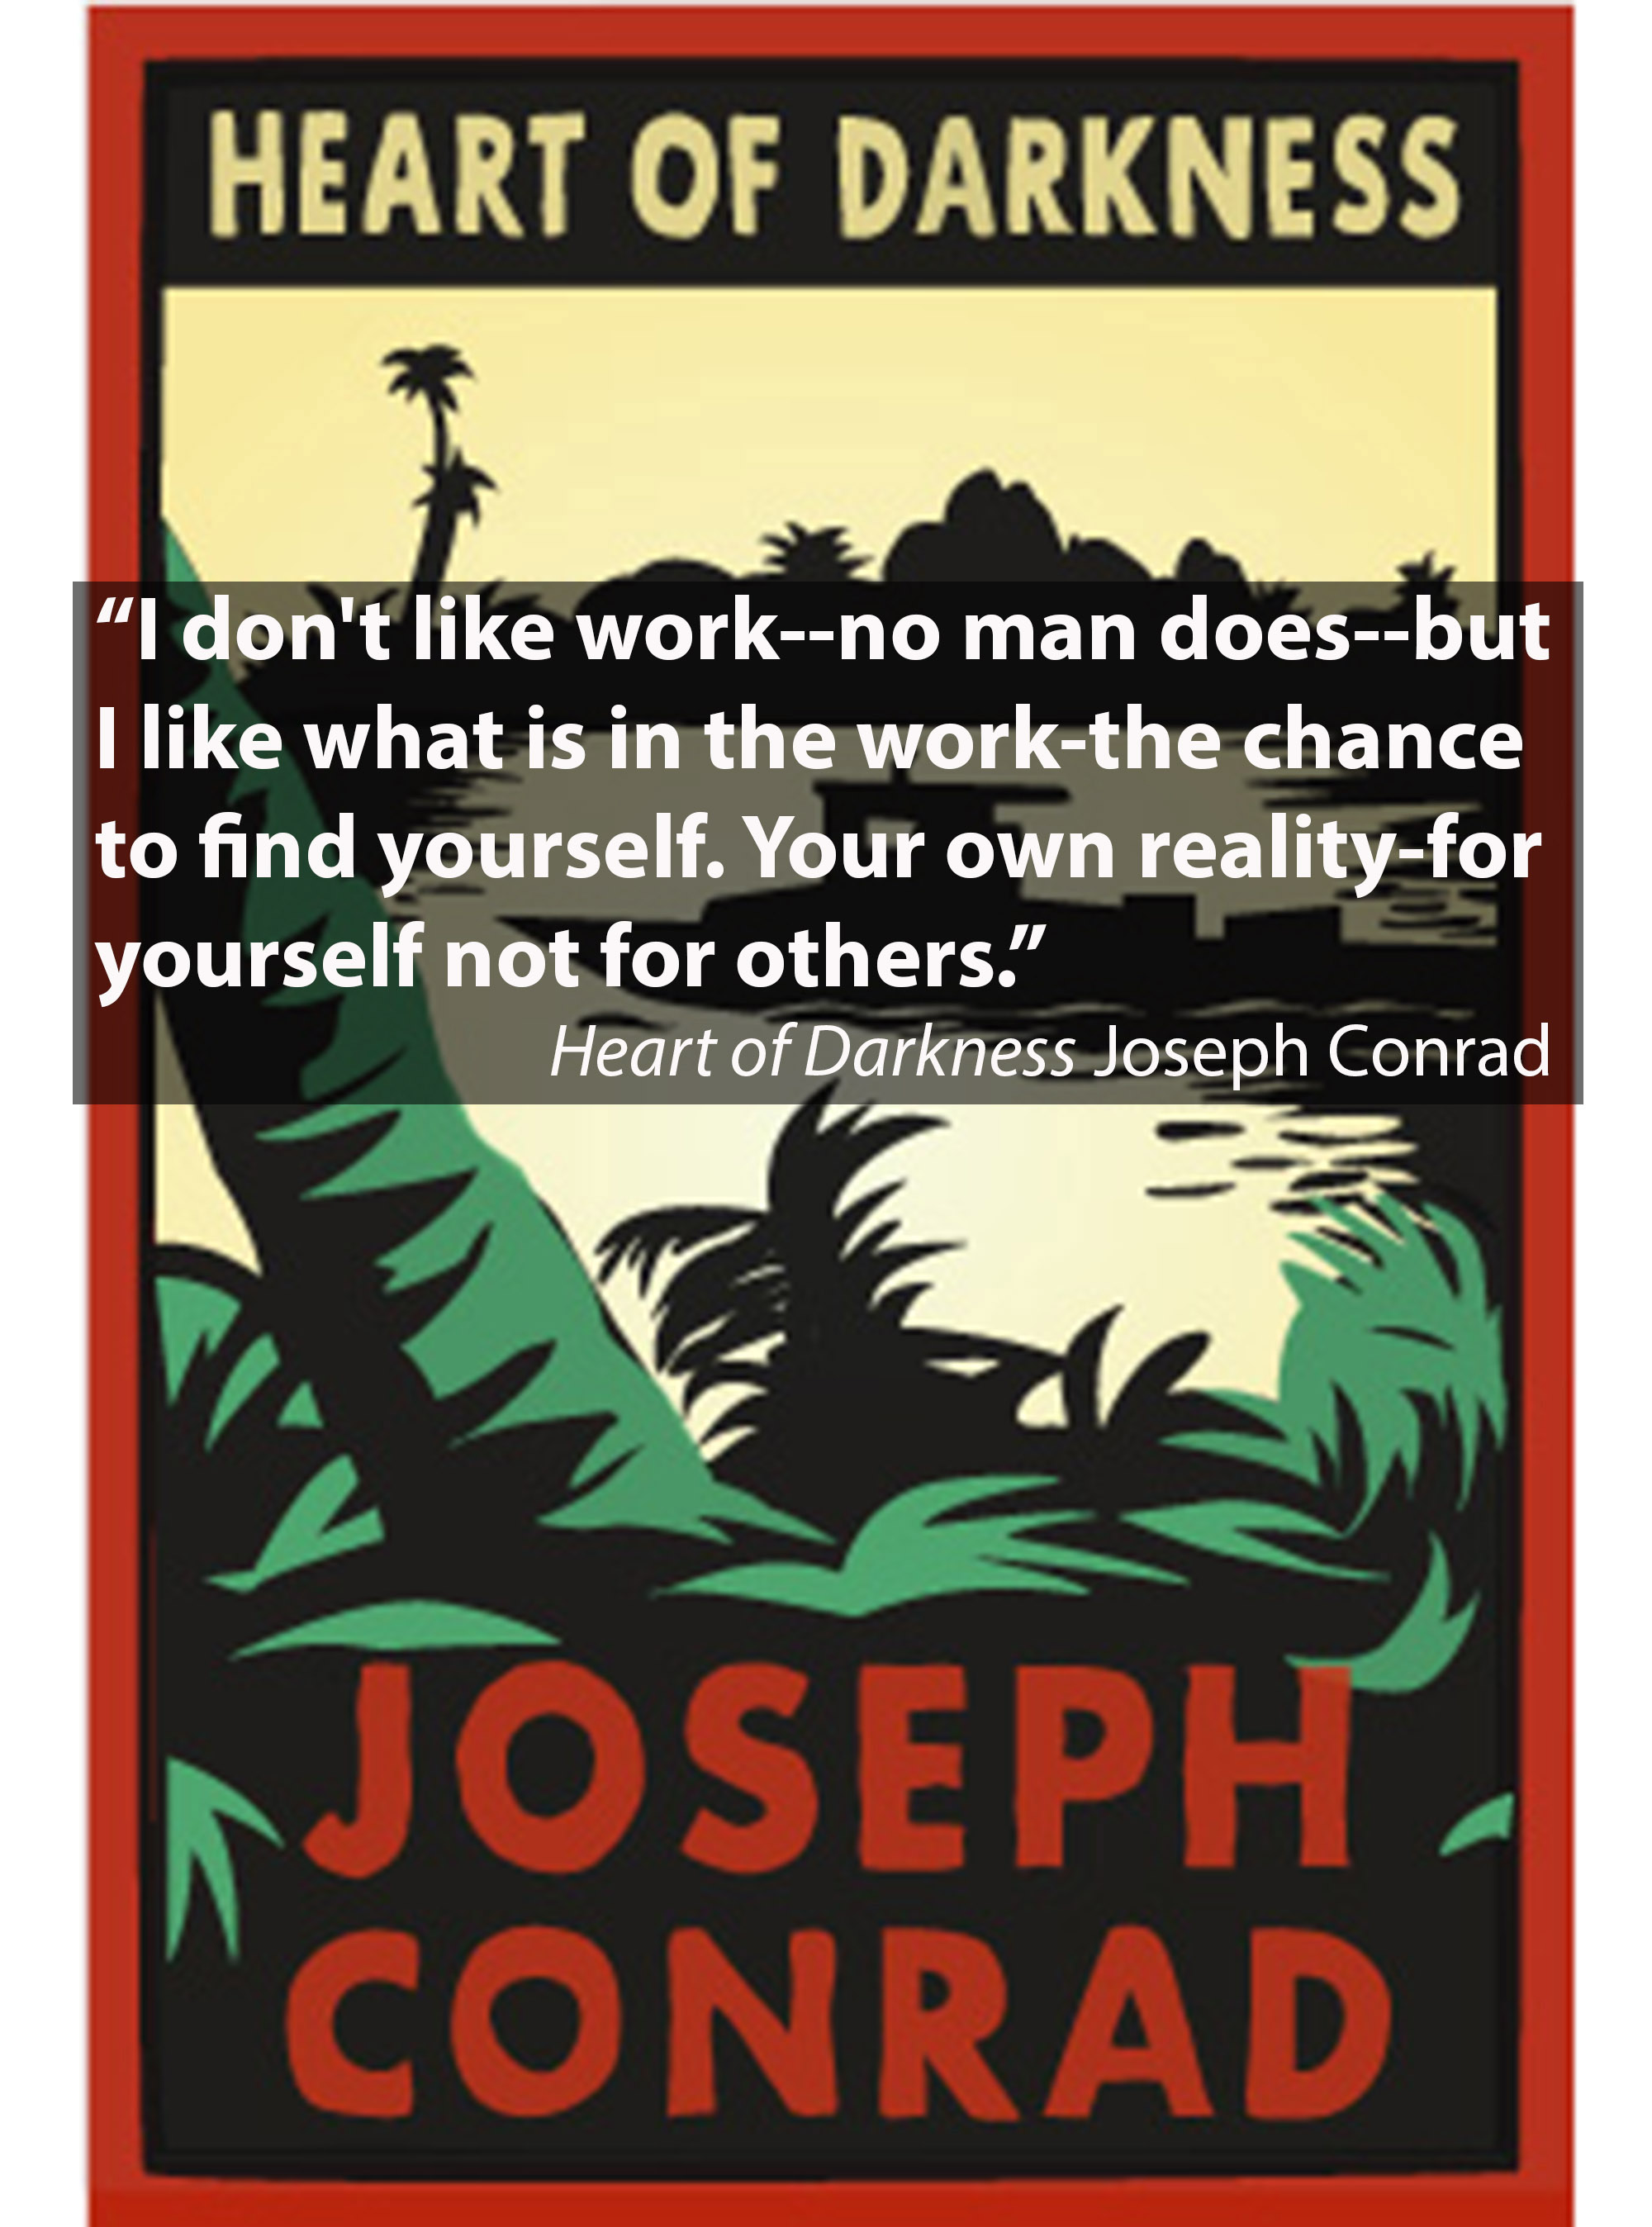 Heart of Darkness by Joseph Conrad - Best Book Quotes - Woman And Home